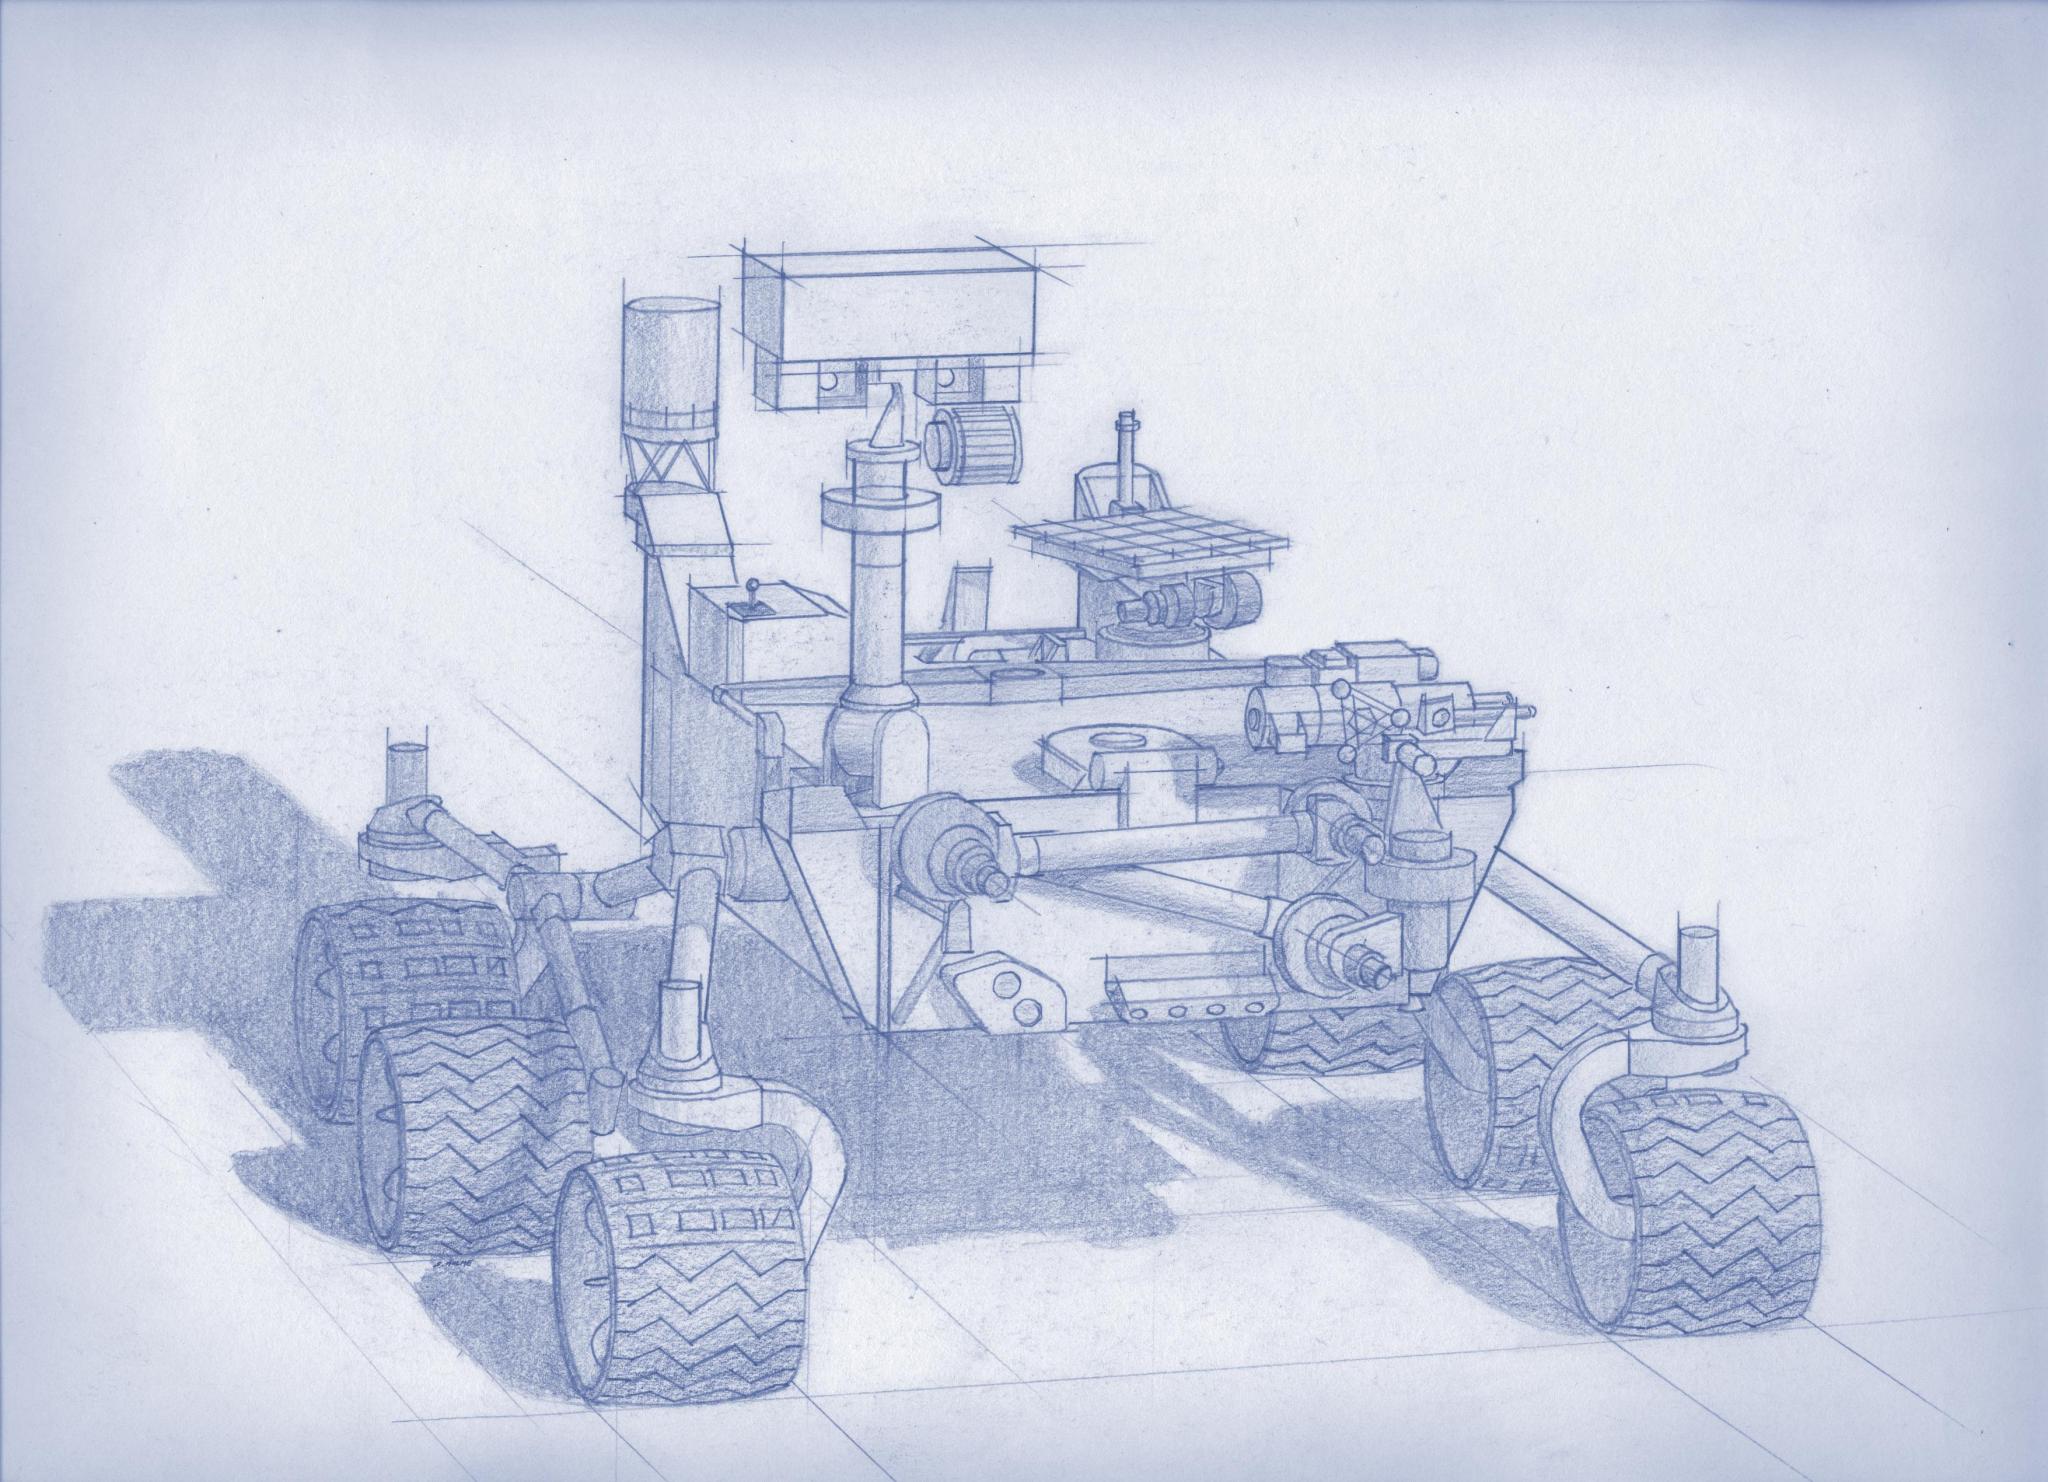 Concept image of Mars rover